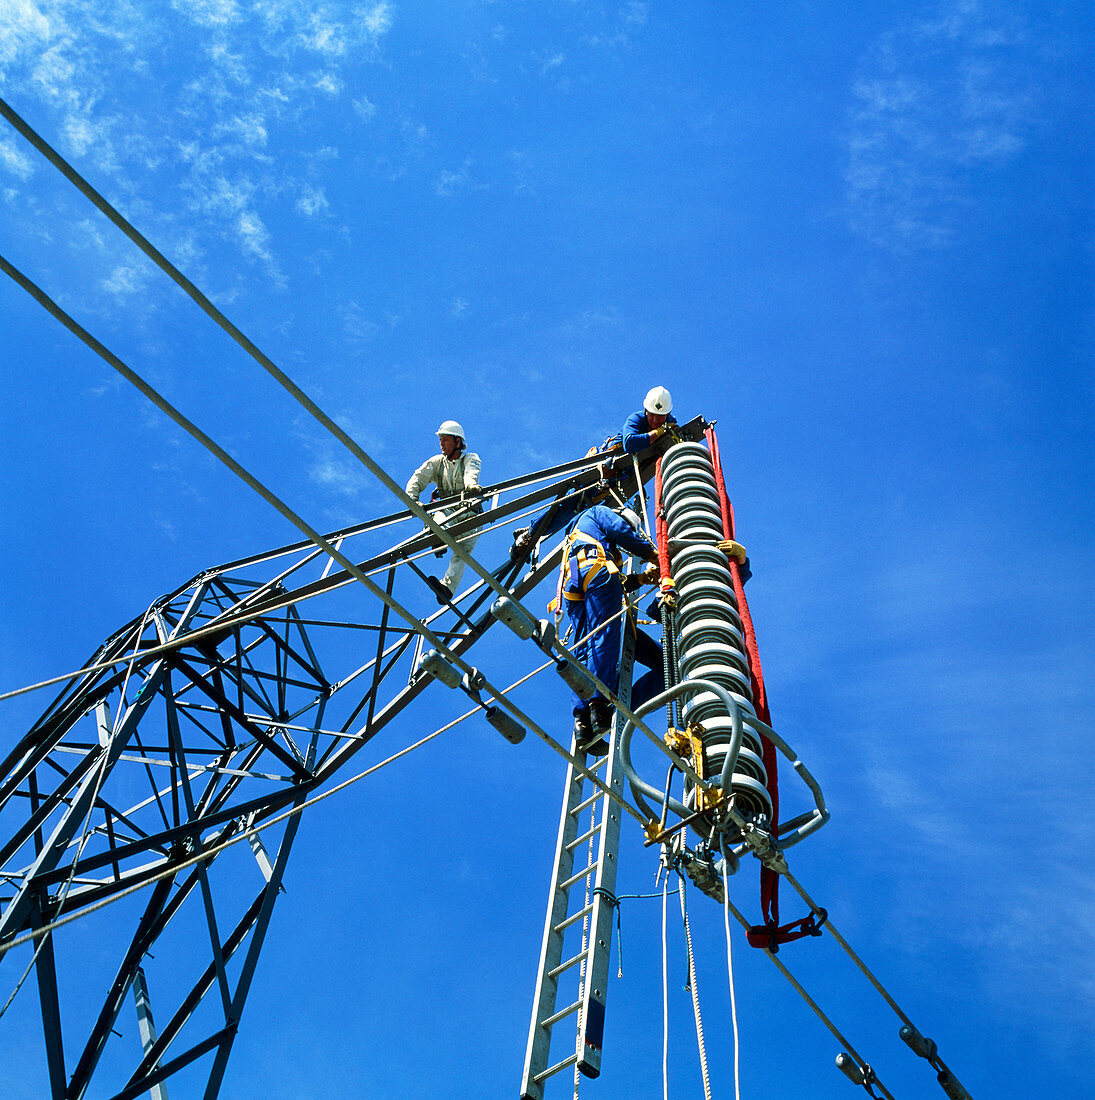 Technicians servicing a power line in training